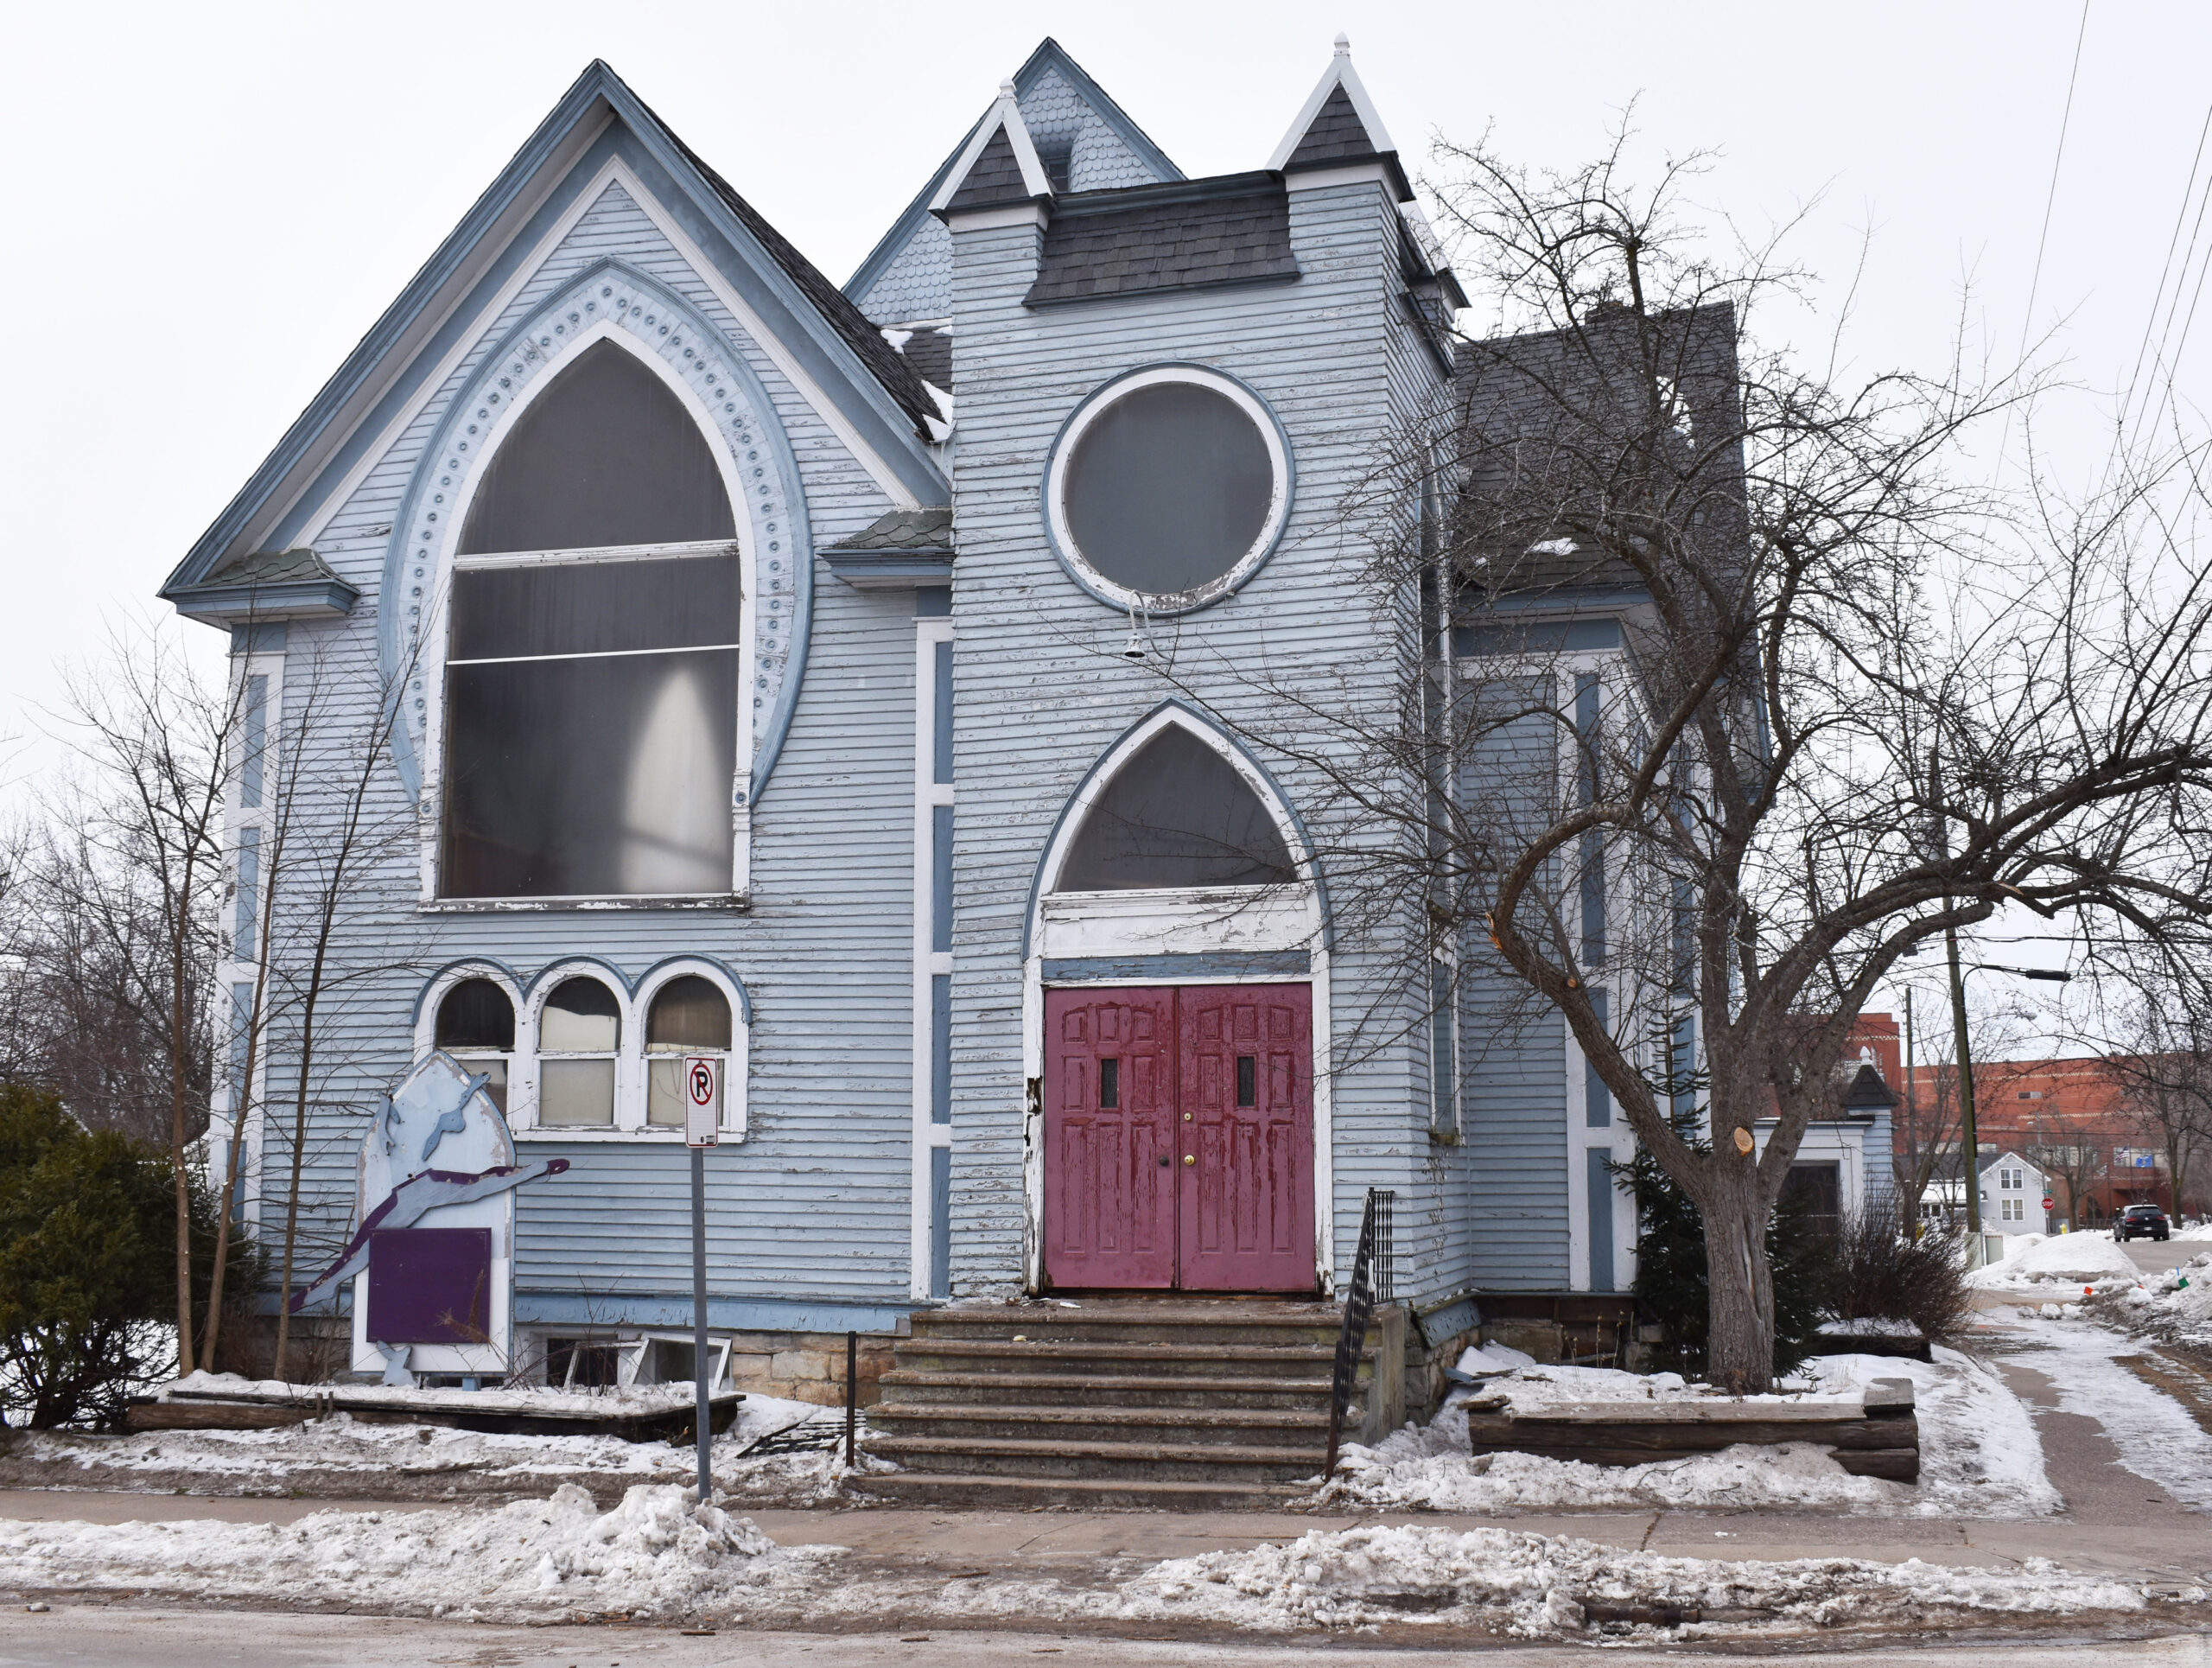 As 120-year-old Stevens Point church building faces demolition, group plans memorial